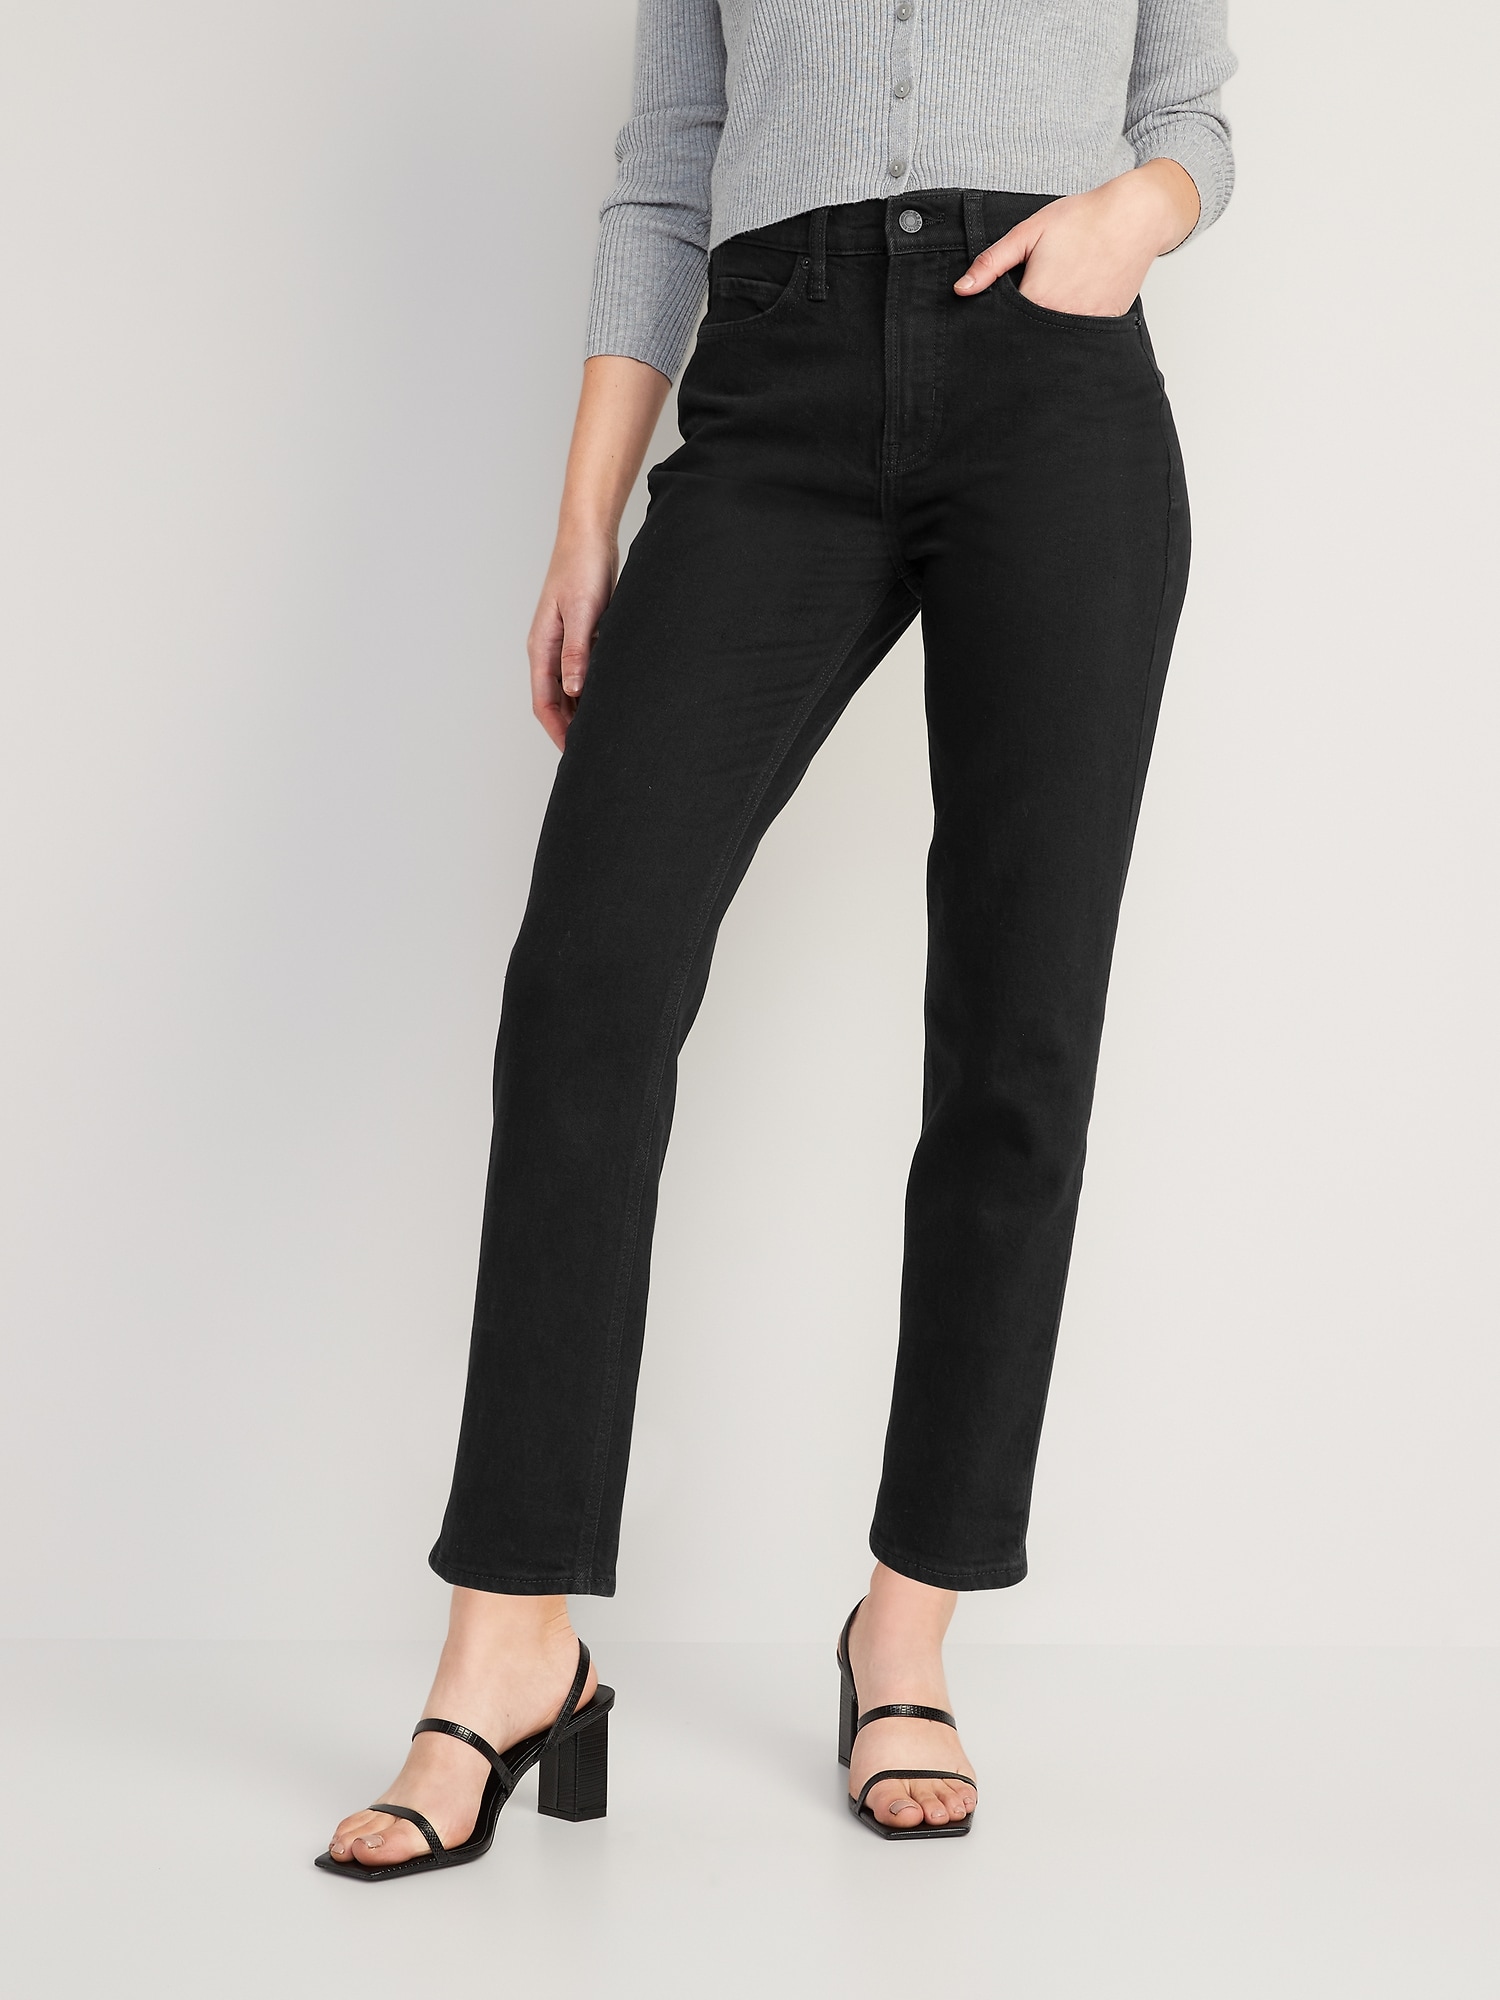 Harleigh Black Super High Rise Mom Jeans FINAL SALE – Pink Lily